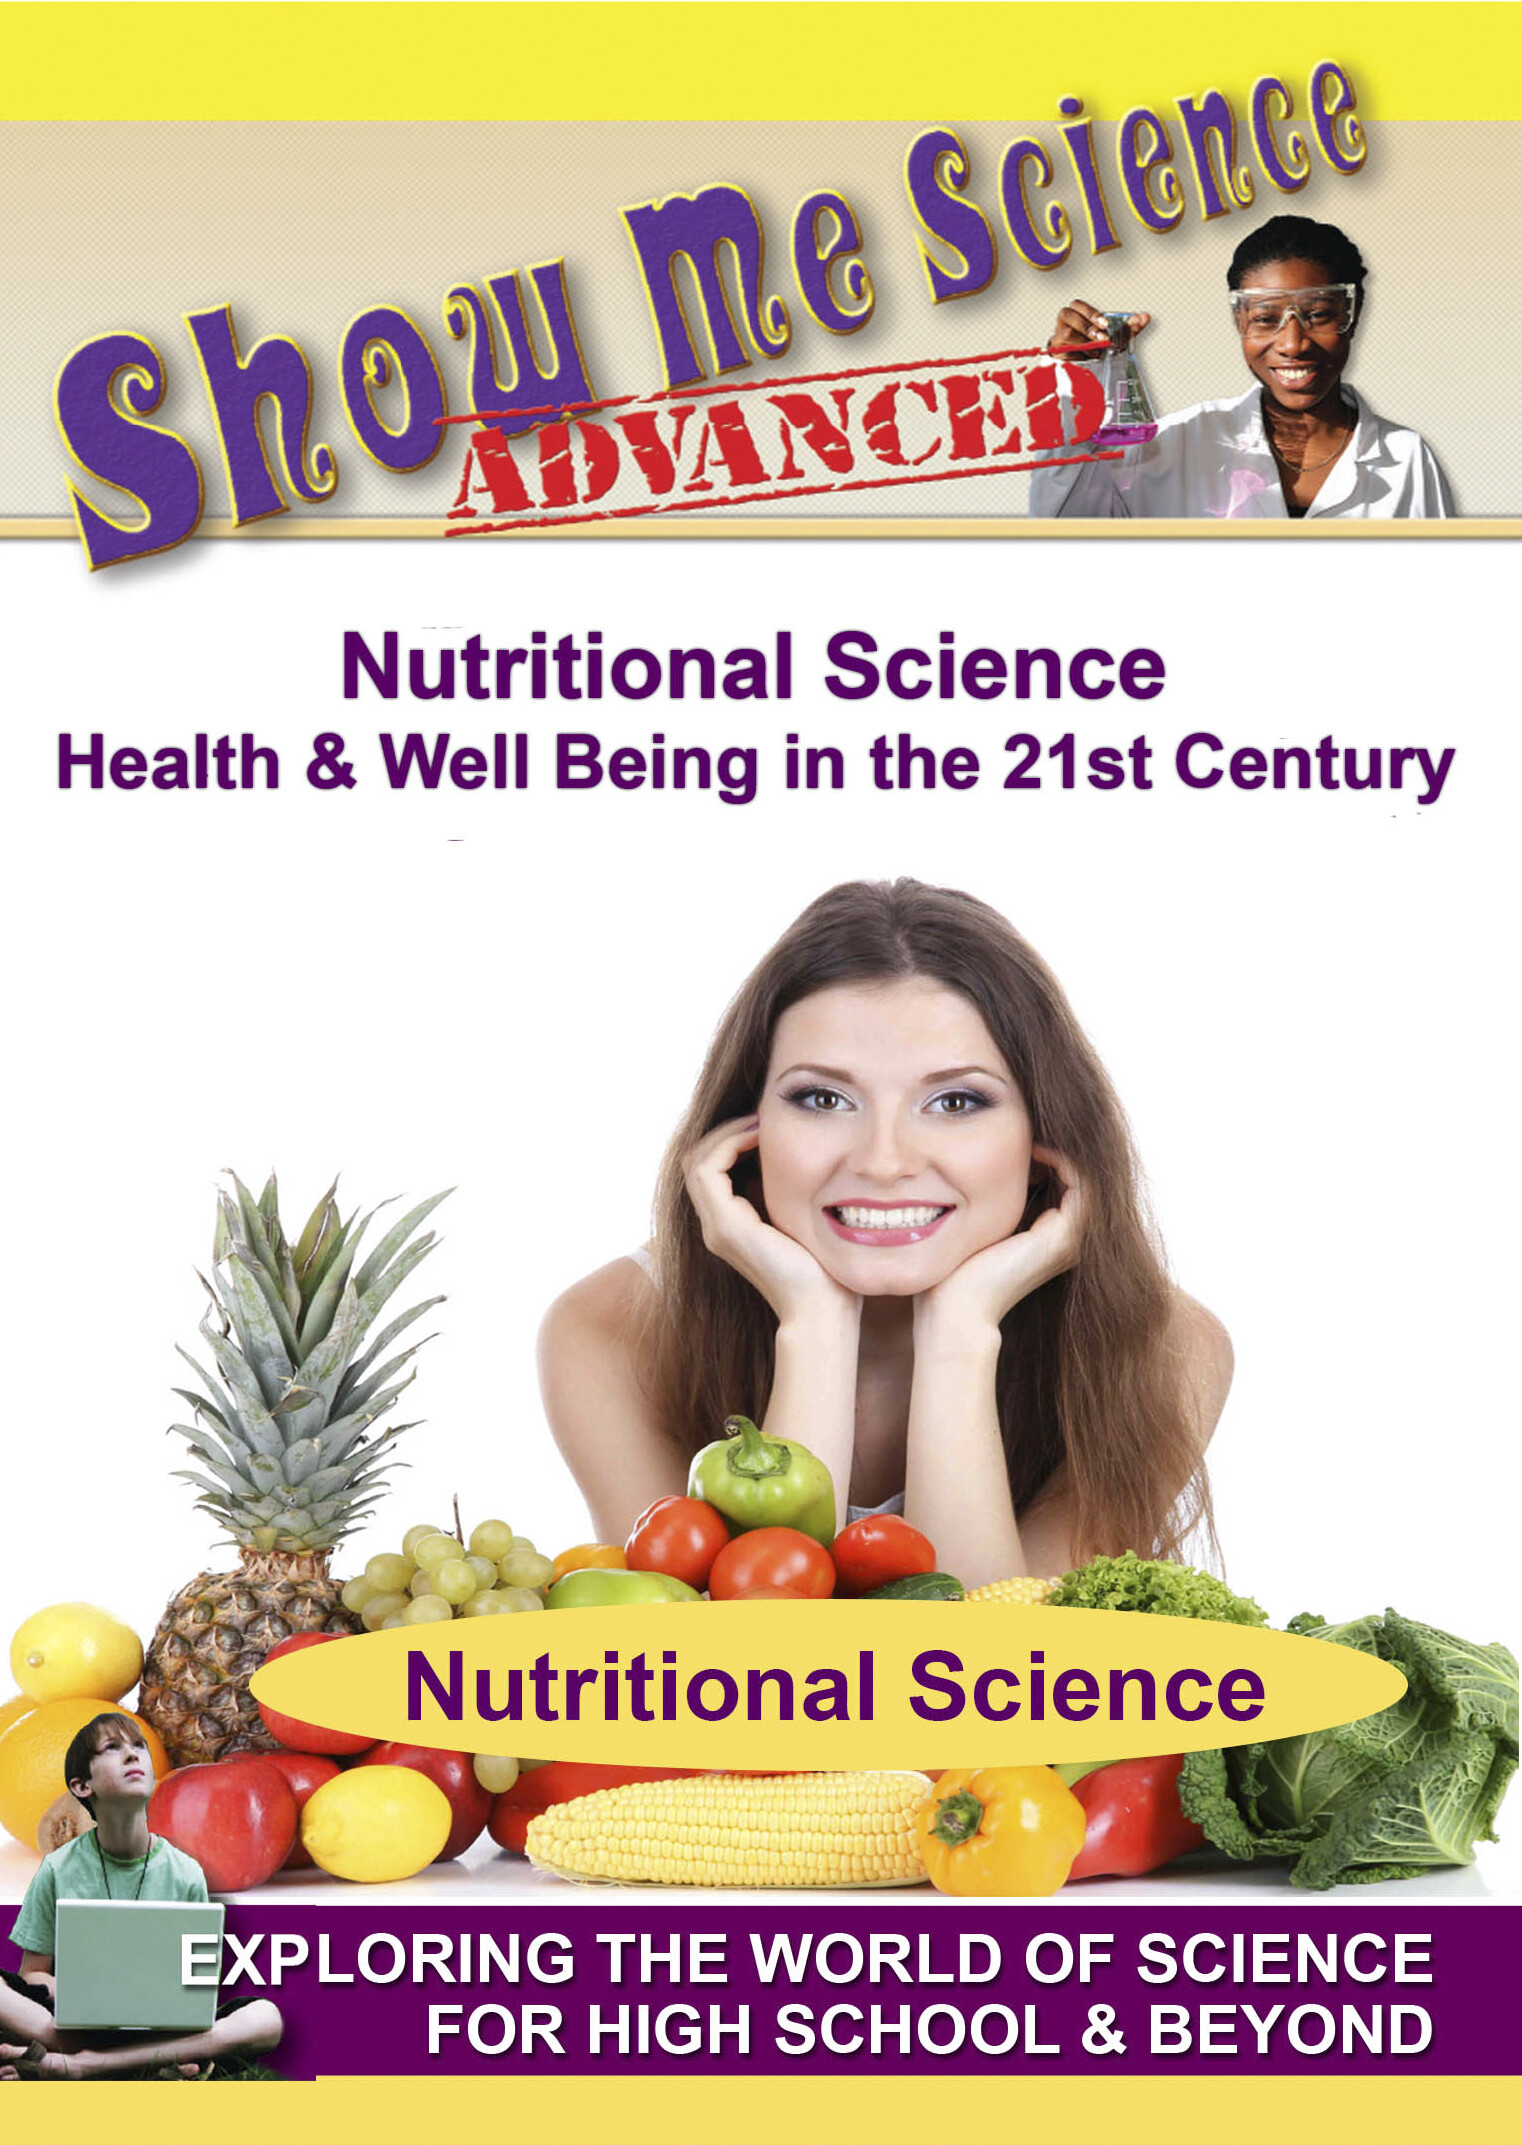 K4687 - Nutritional Science Health & Well Being in the 21st Century